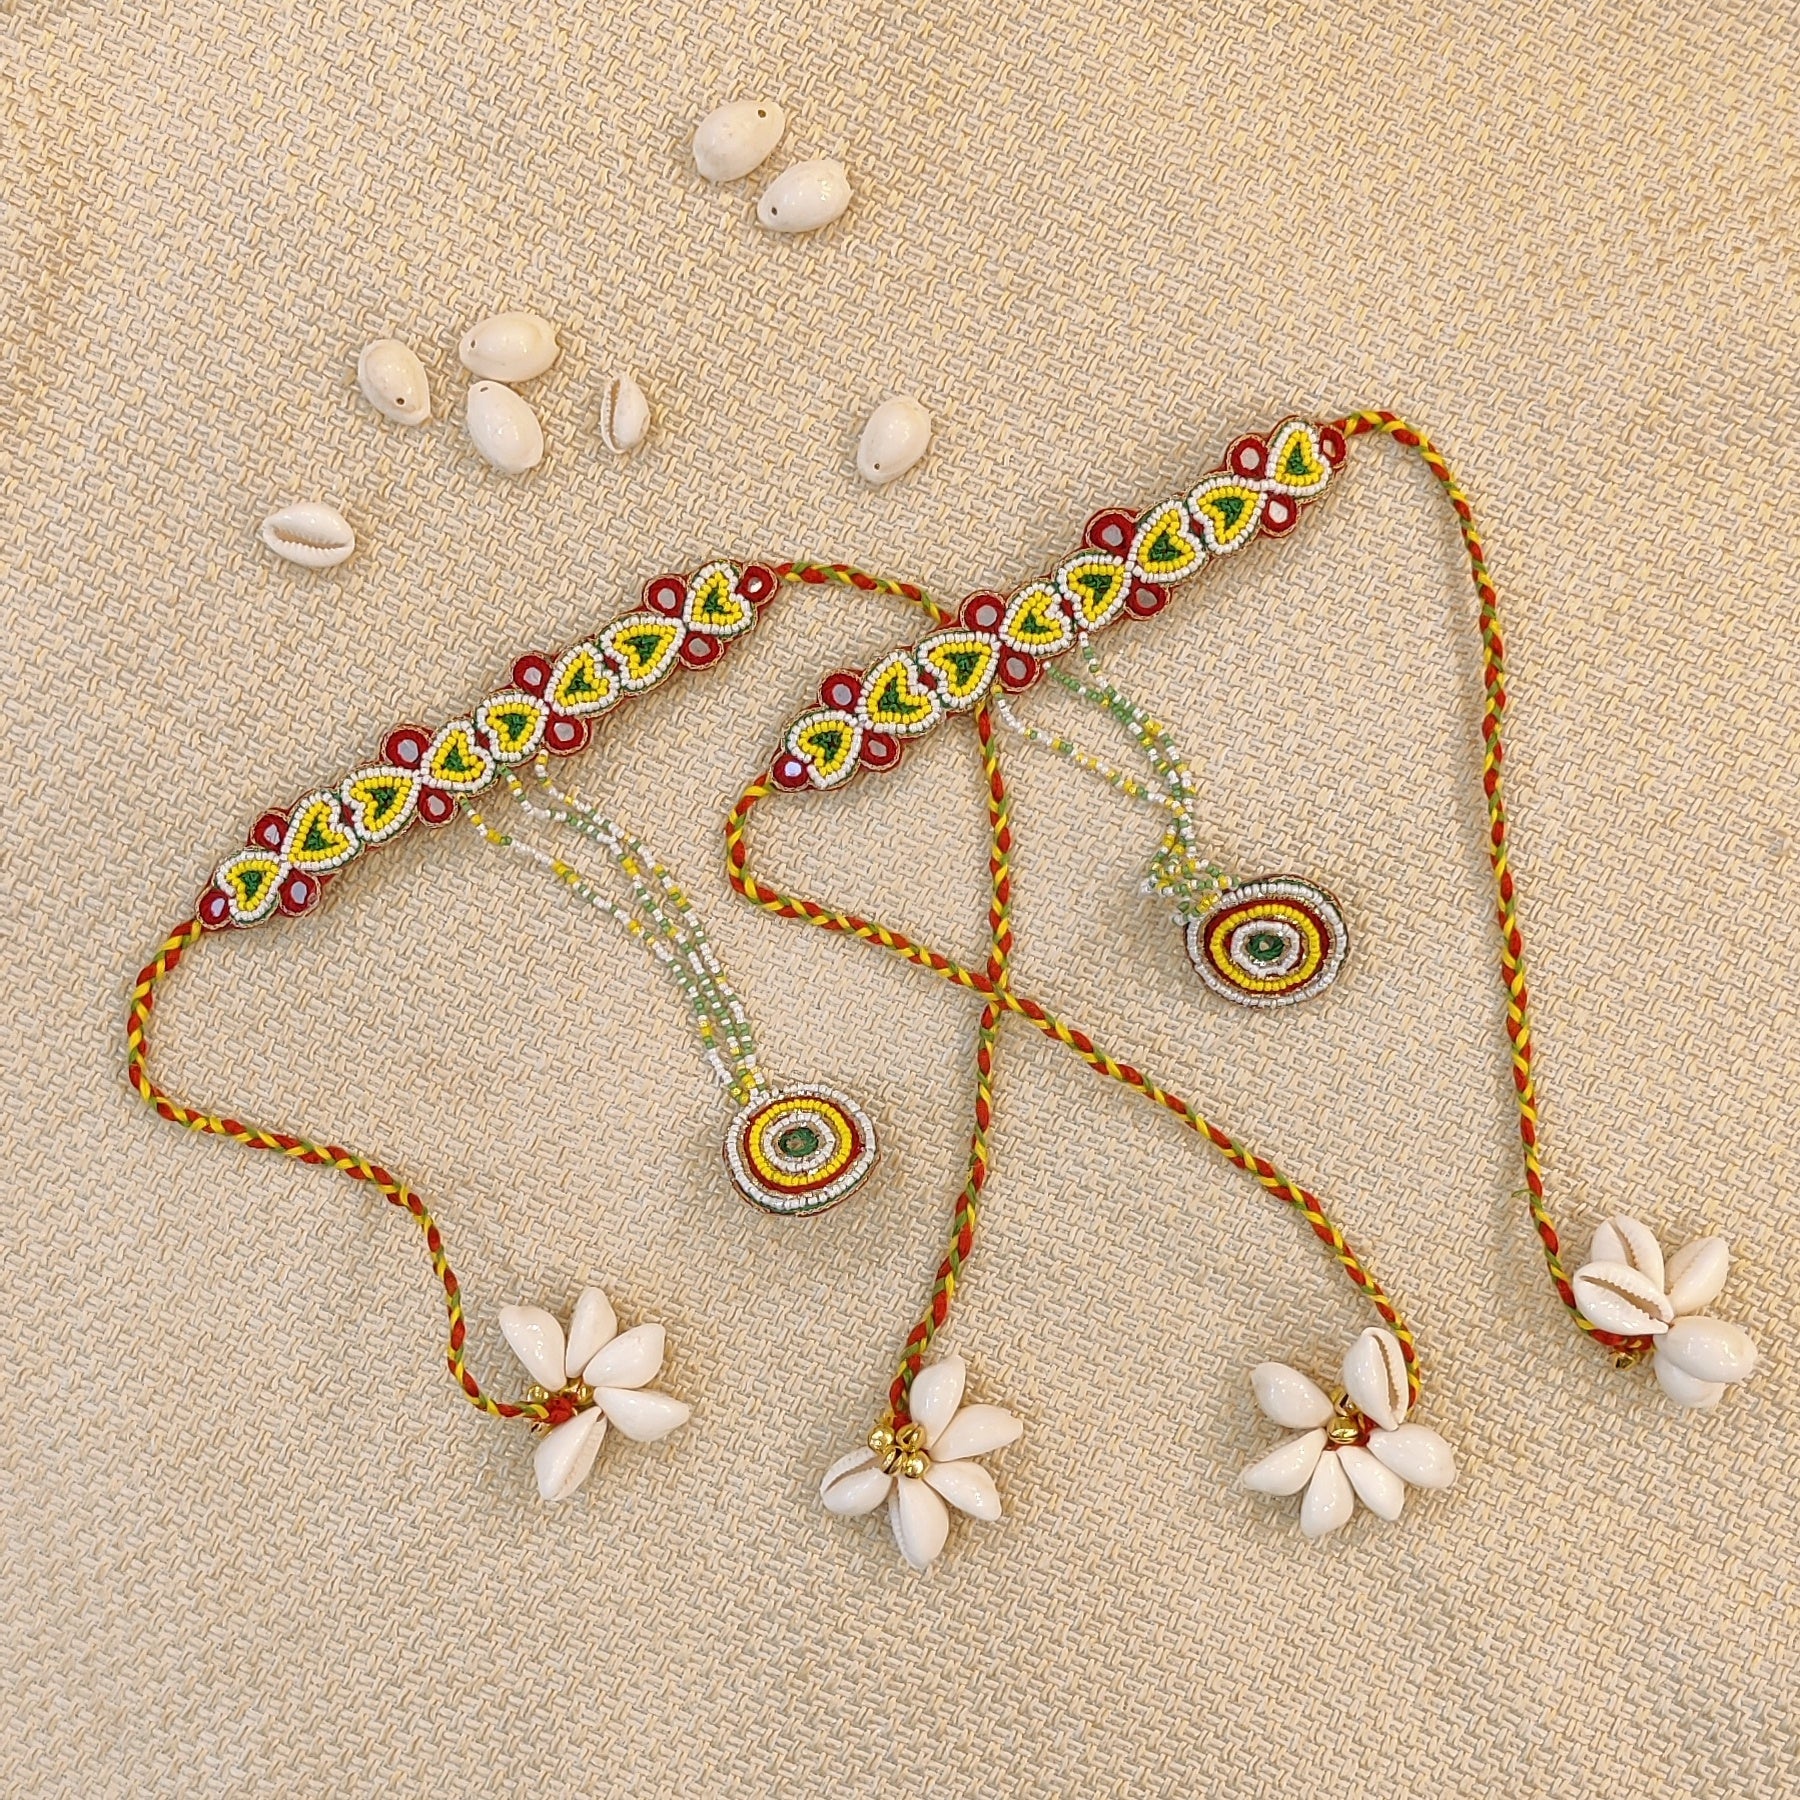 Handmade Embroidered Accessories - Heartily Handcrafted by Sarrah